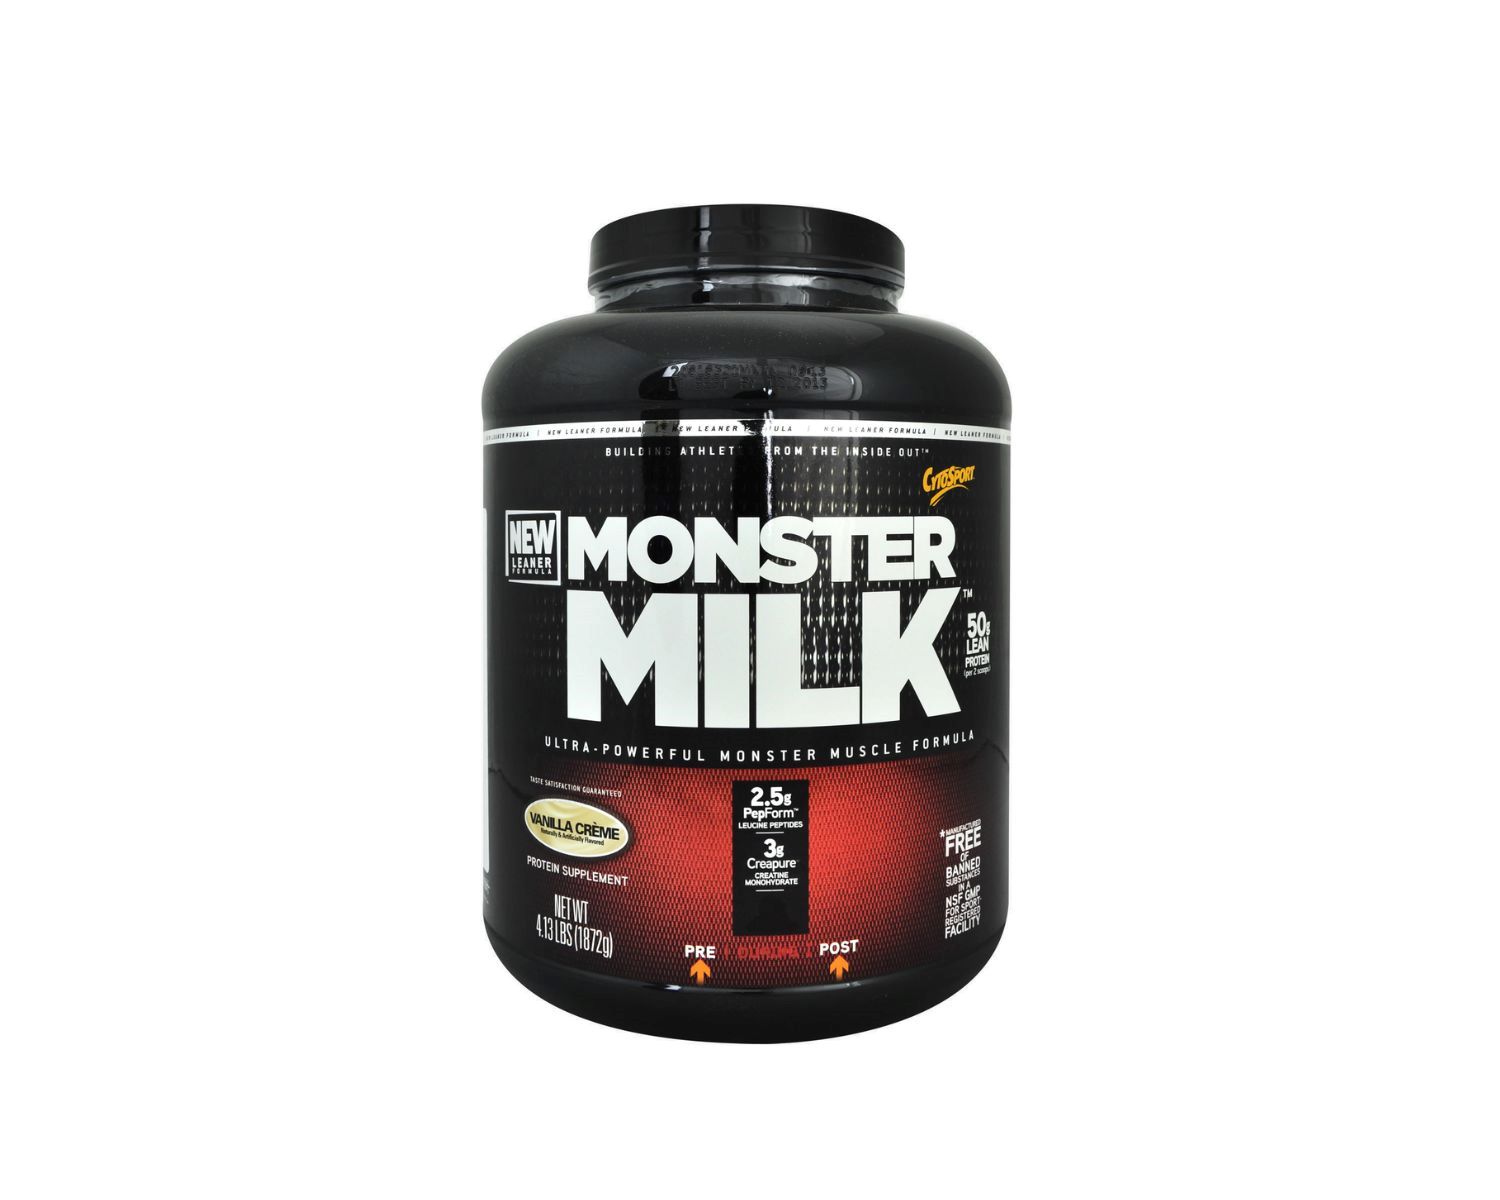 11-monster-milk-nutritional-facts